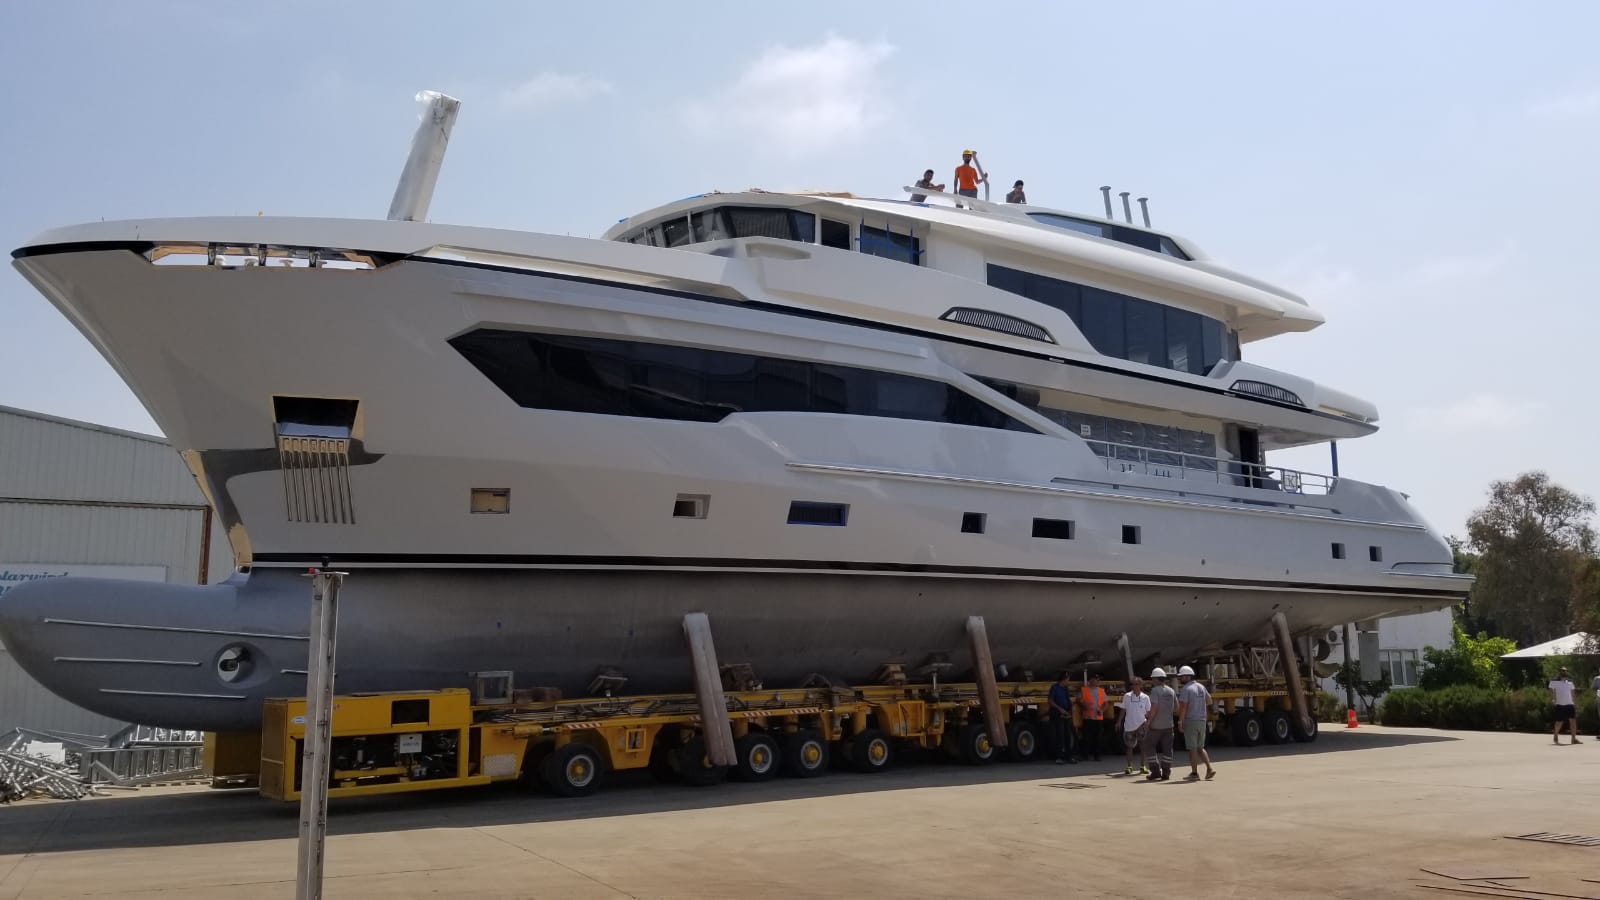 Kando 110 Superyacht for sale with Yacht & Villa emerges from hangar